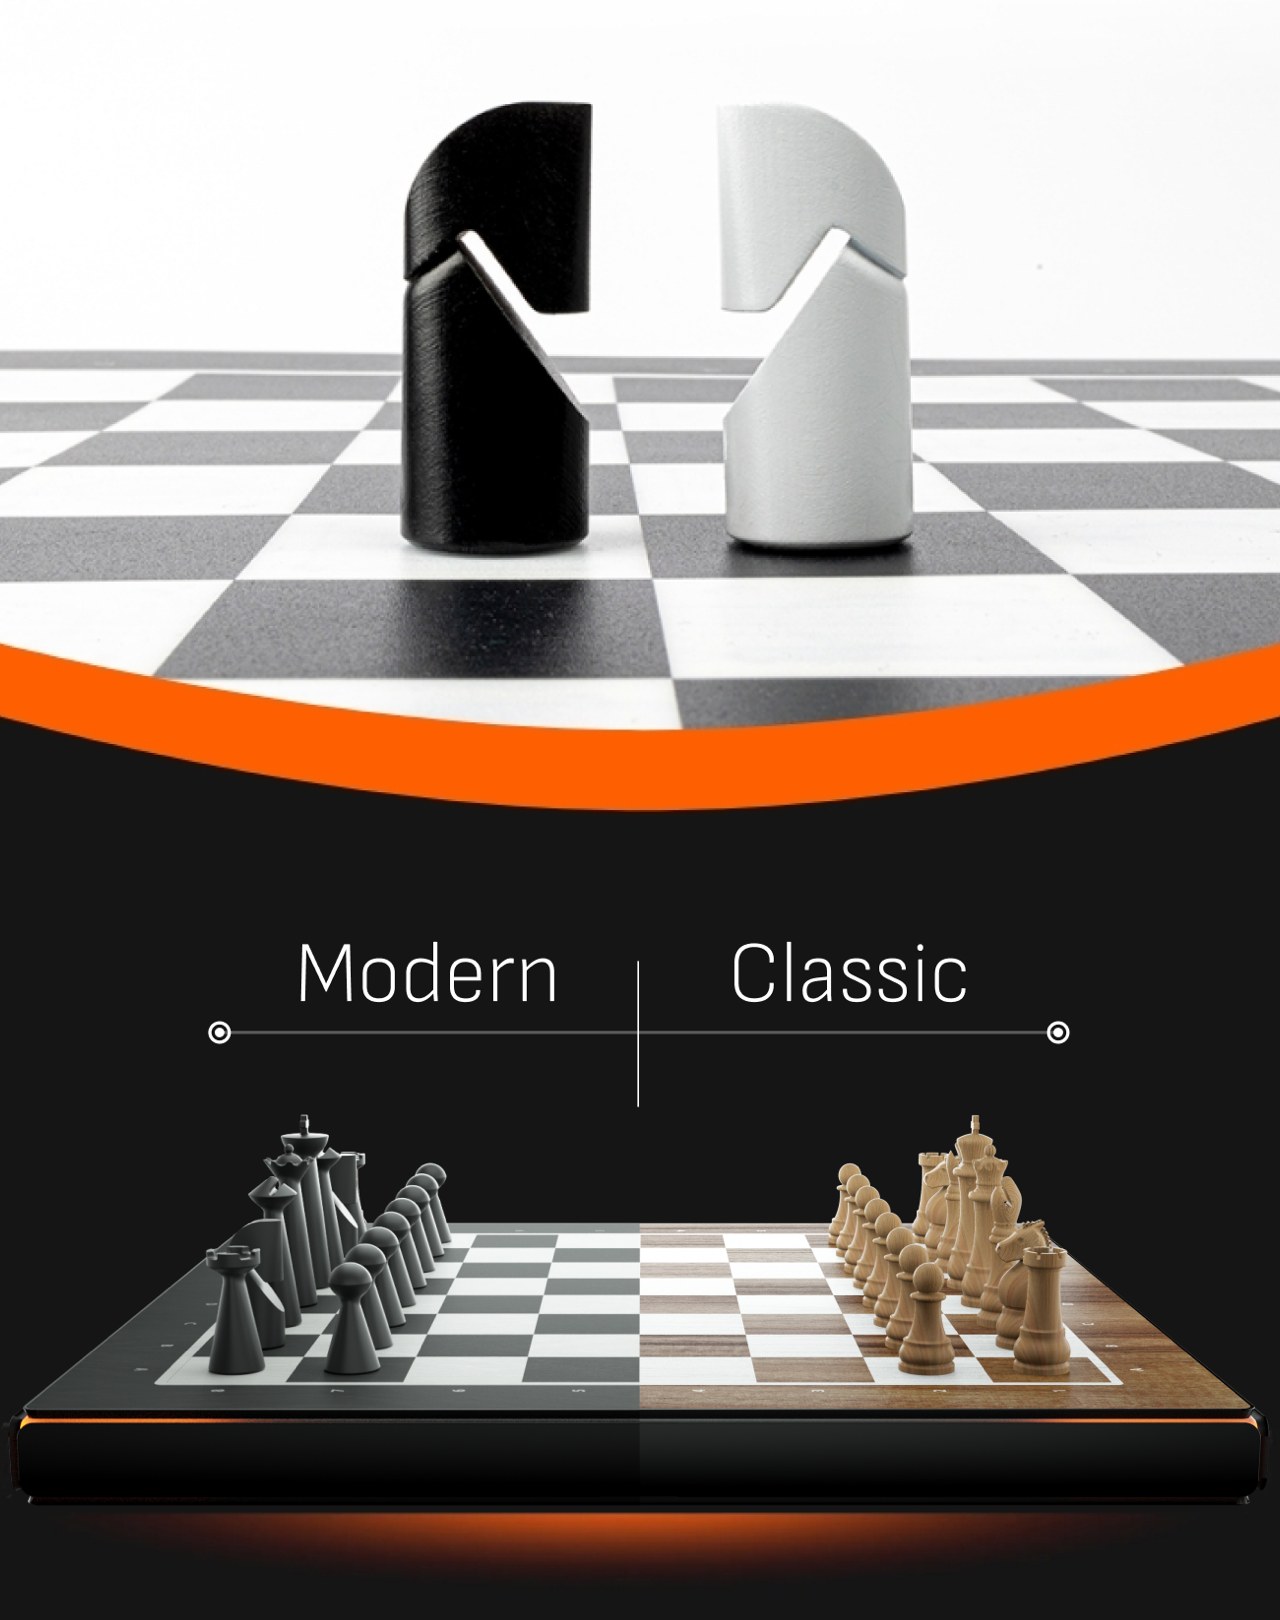 Make Your Own Futuristic Chessboard with This Handy Guide